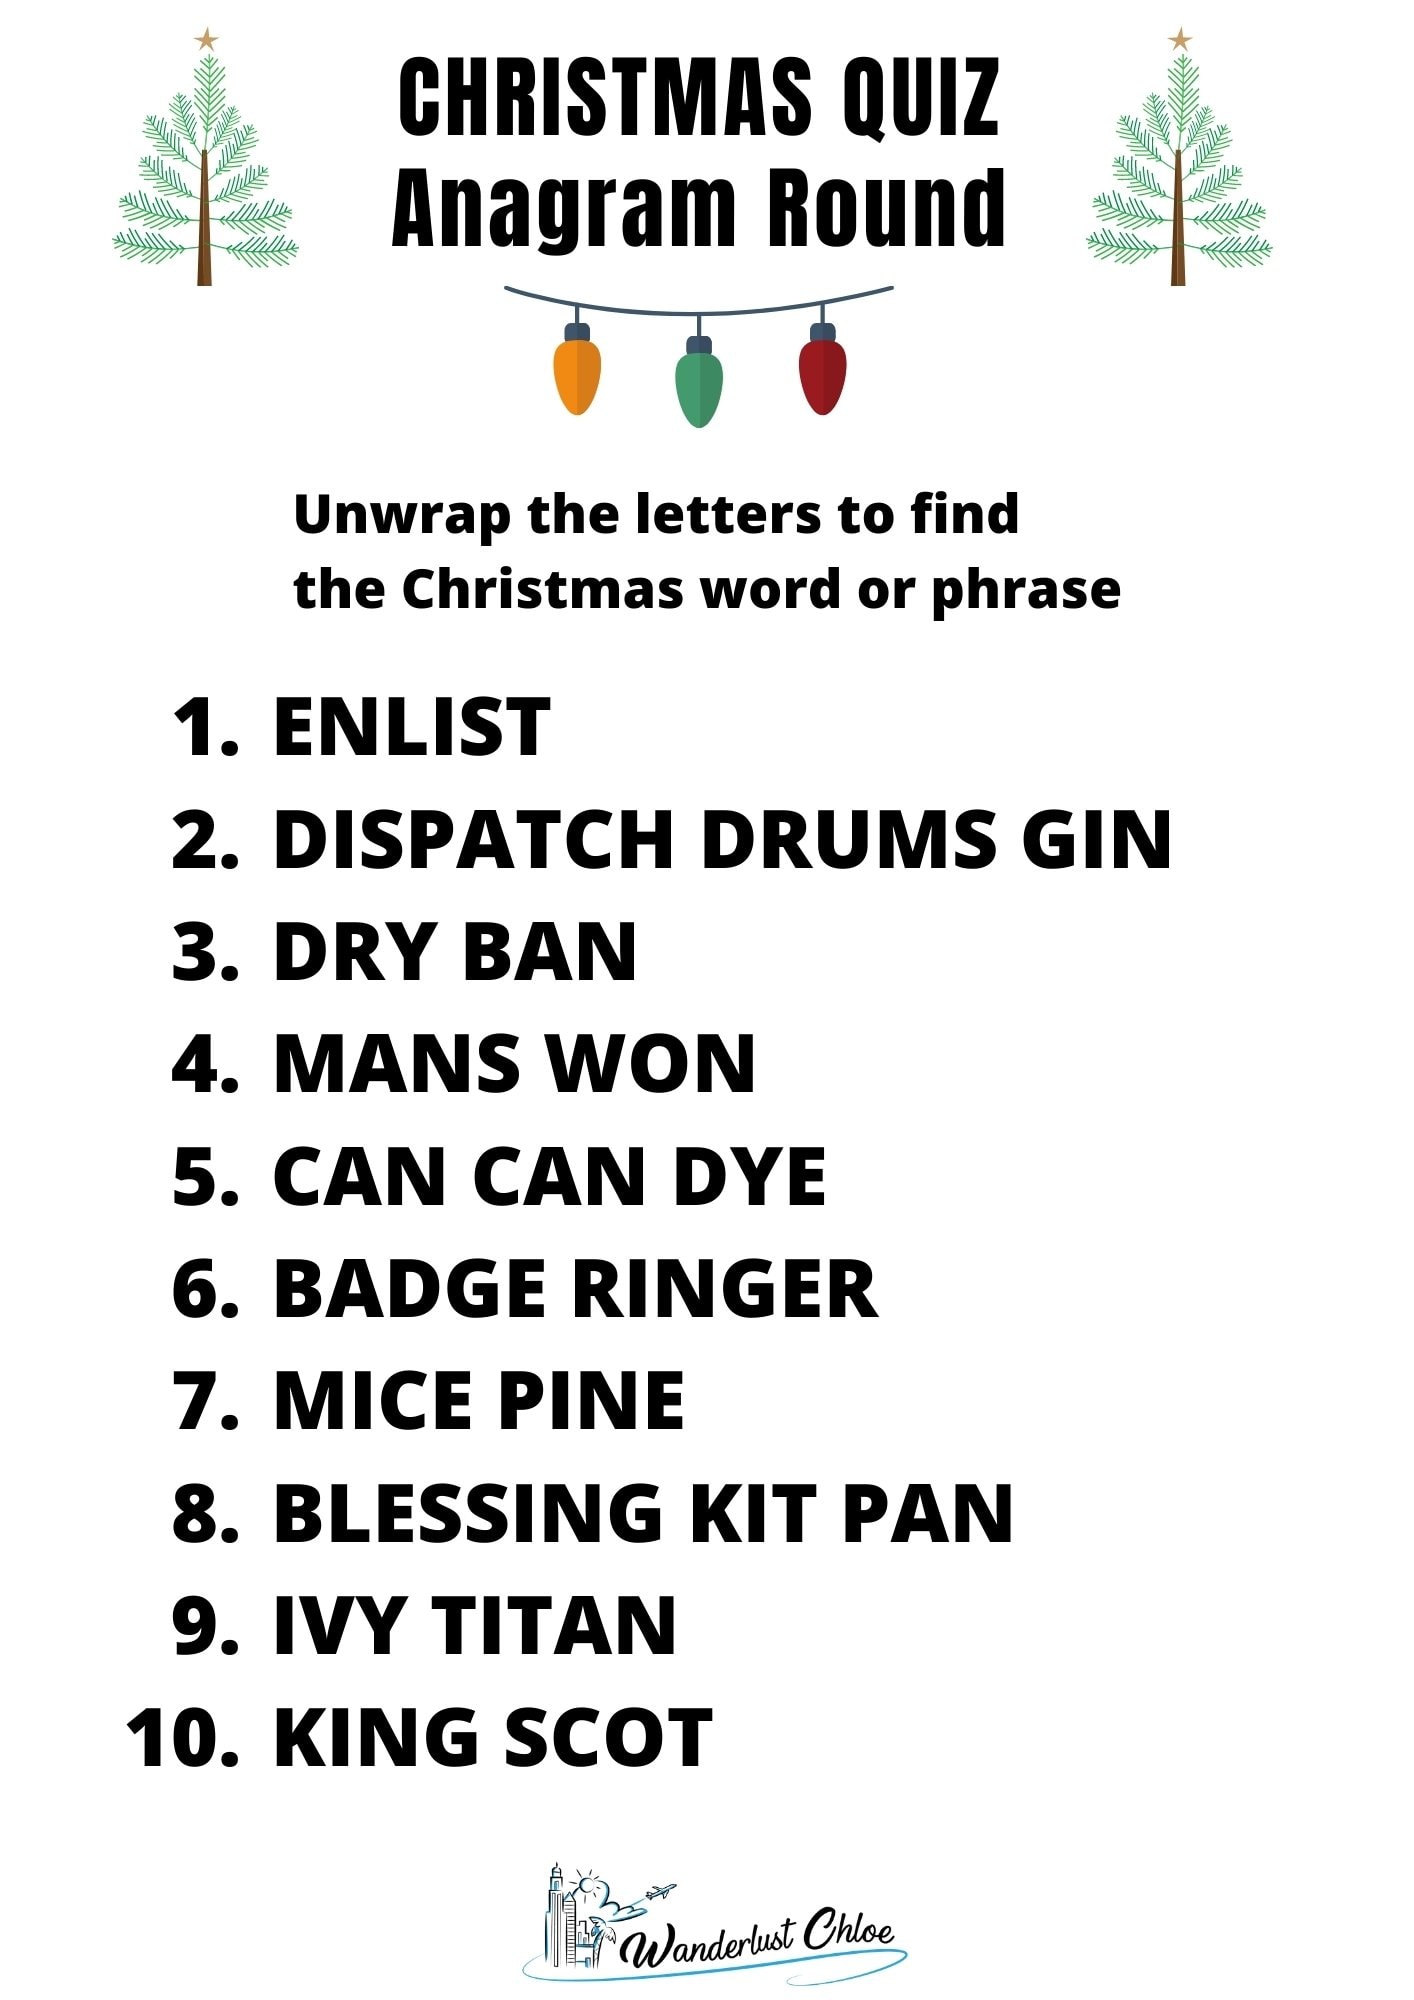 Christmas Picture Quiz - Christmas Anagram Round